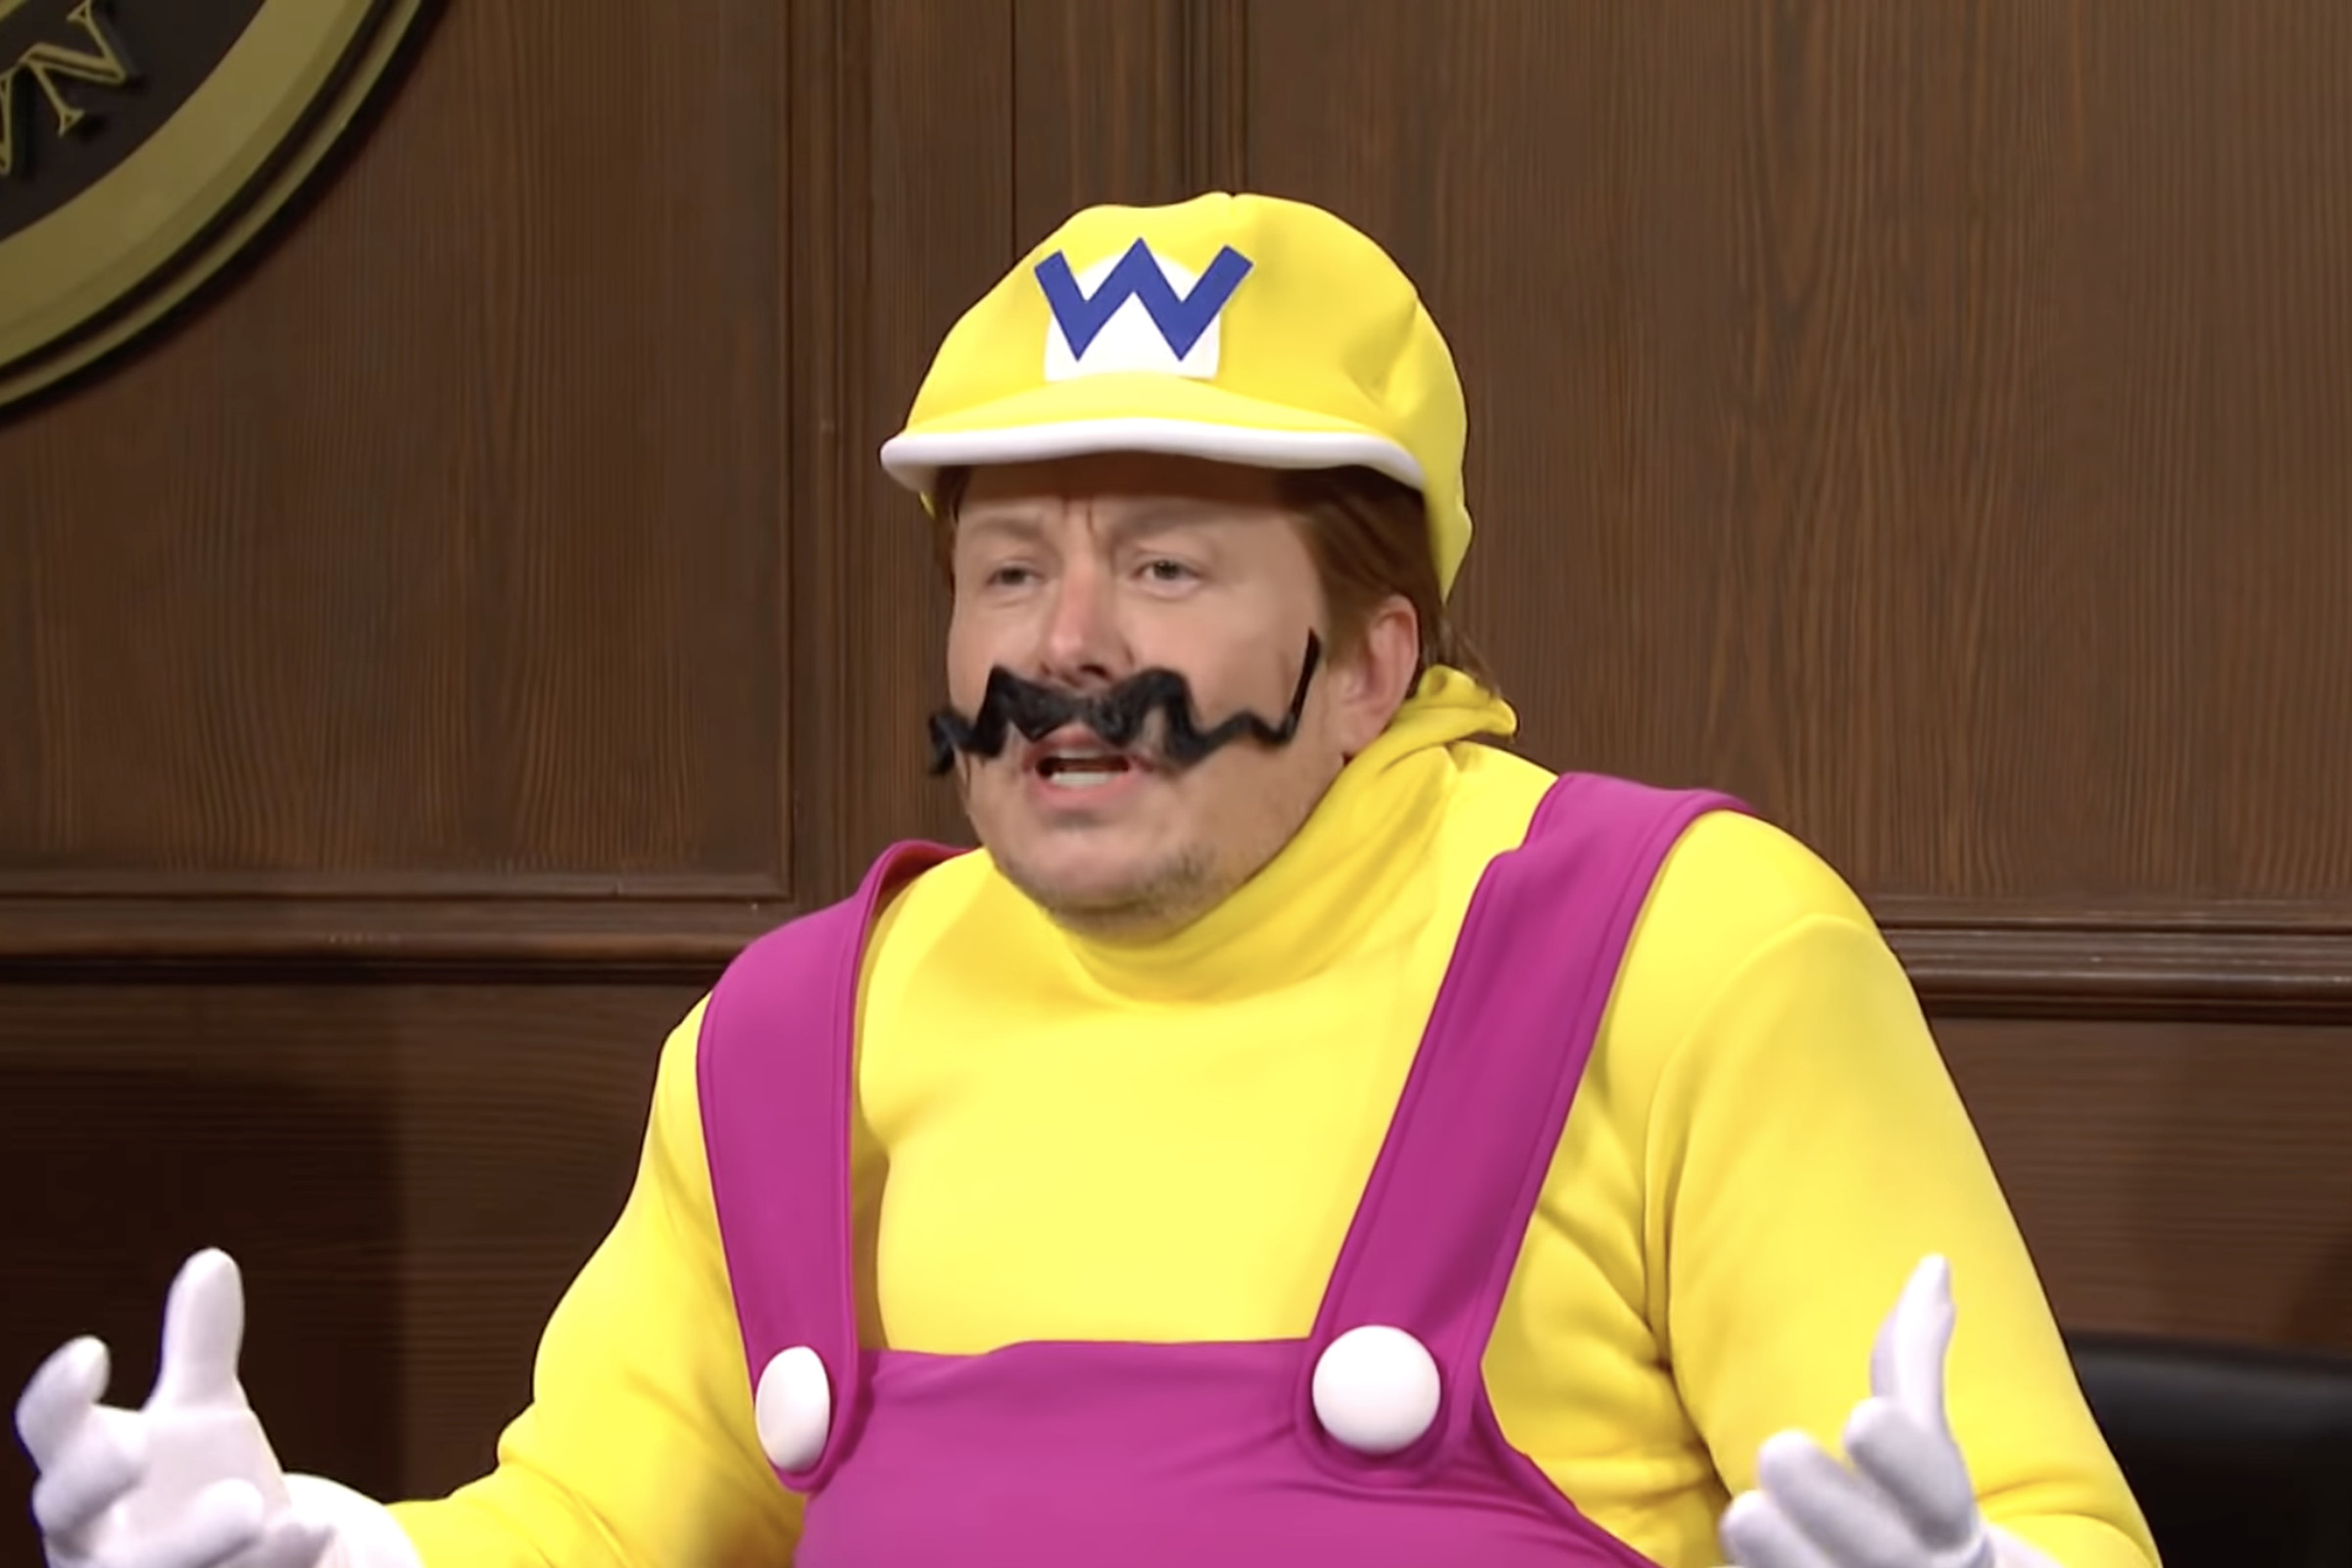 Musk has an interesting relationship with his self-image, as evidenced by his appearance on SNL as Wario. 